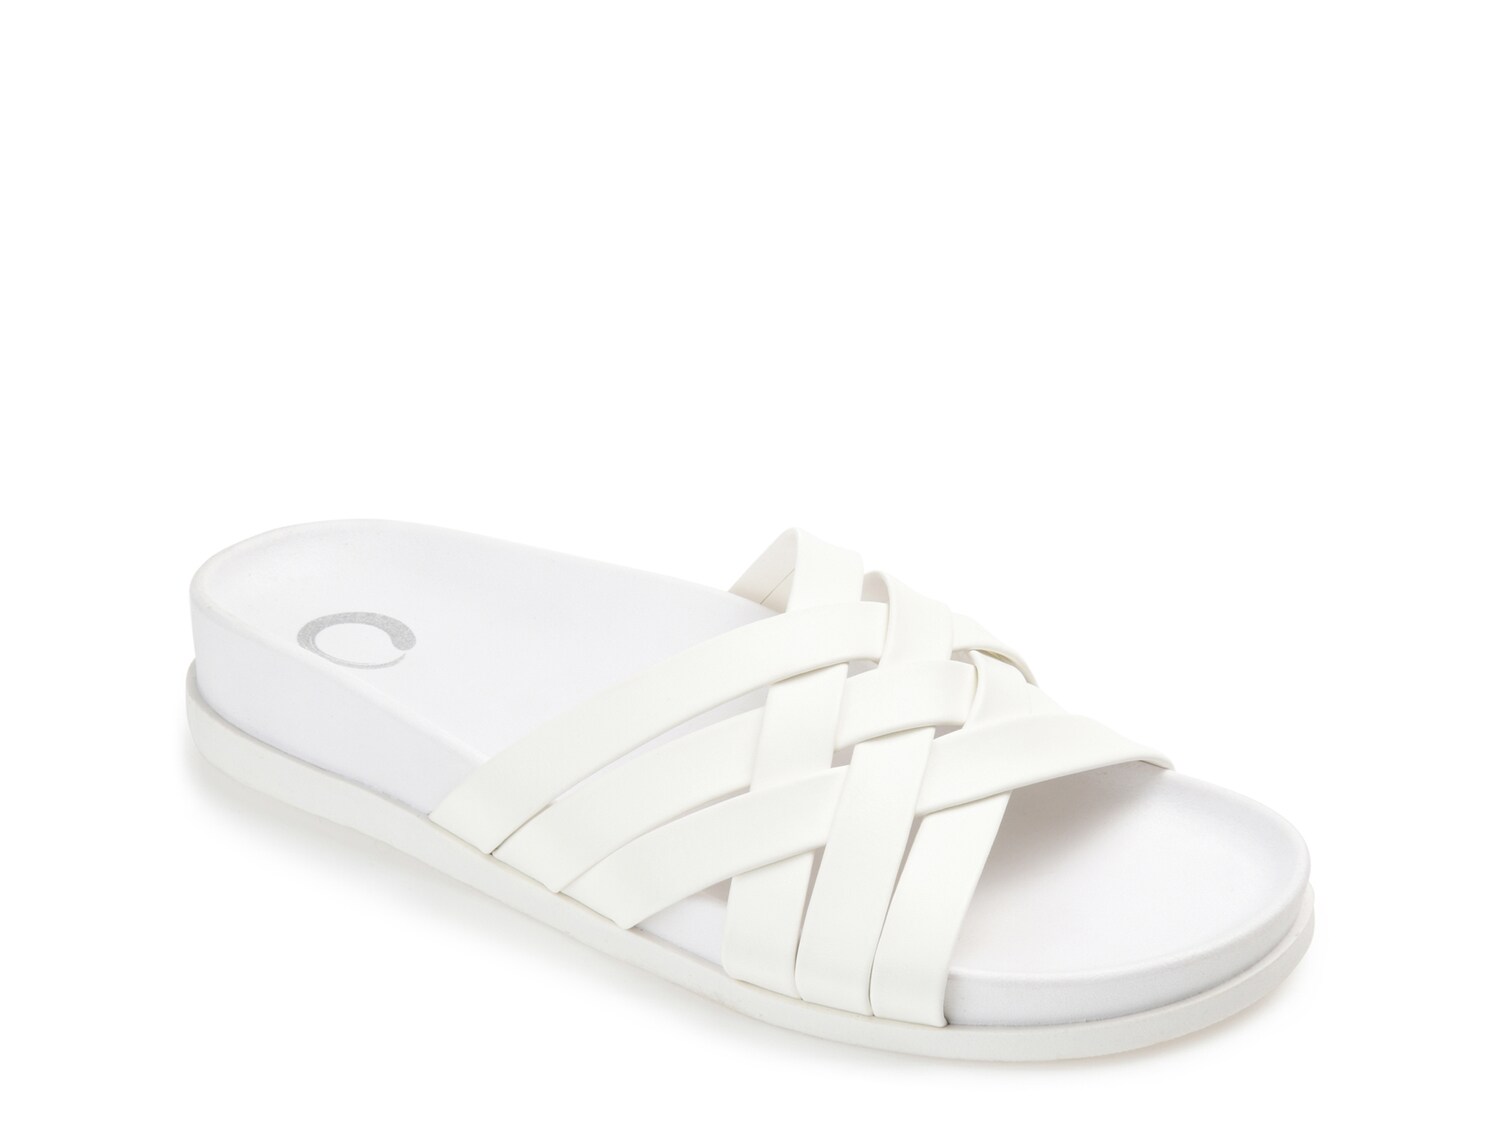 Journee Collection Marina Slide Sandal - Free Shipping | DSW